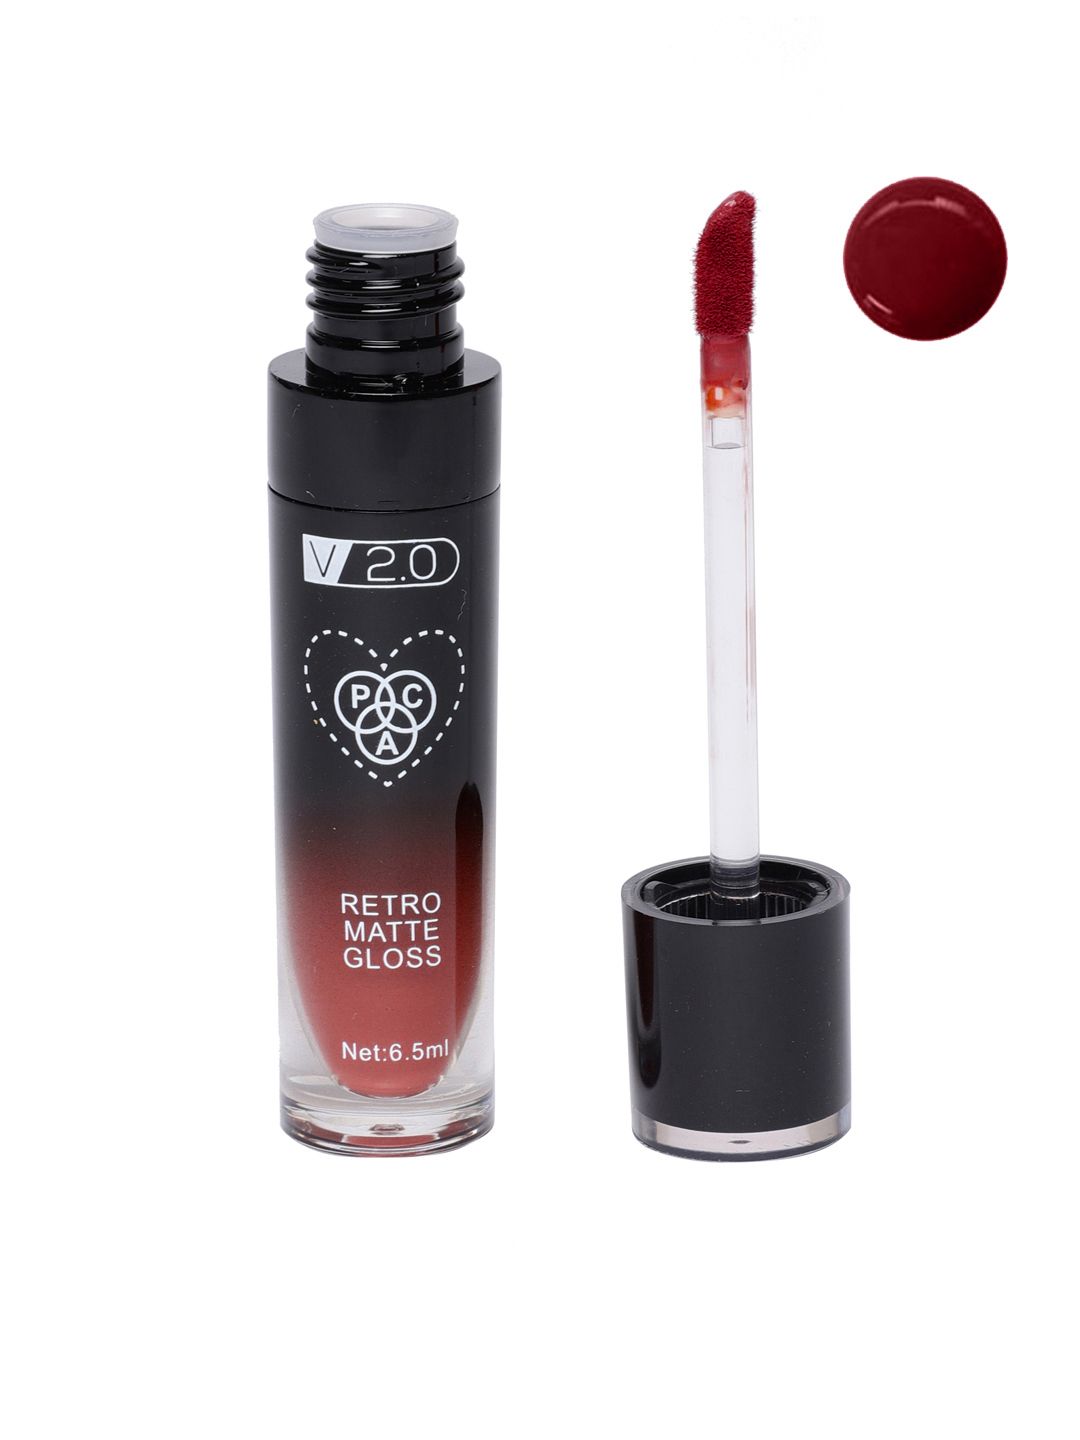 PAC 24 Just Fab Retro Matte Gloss 6.5 ml Price in India